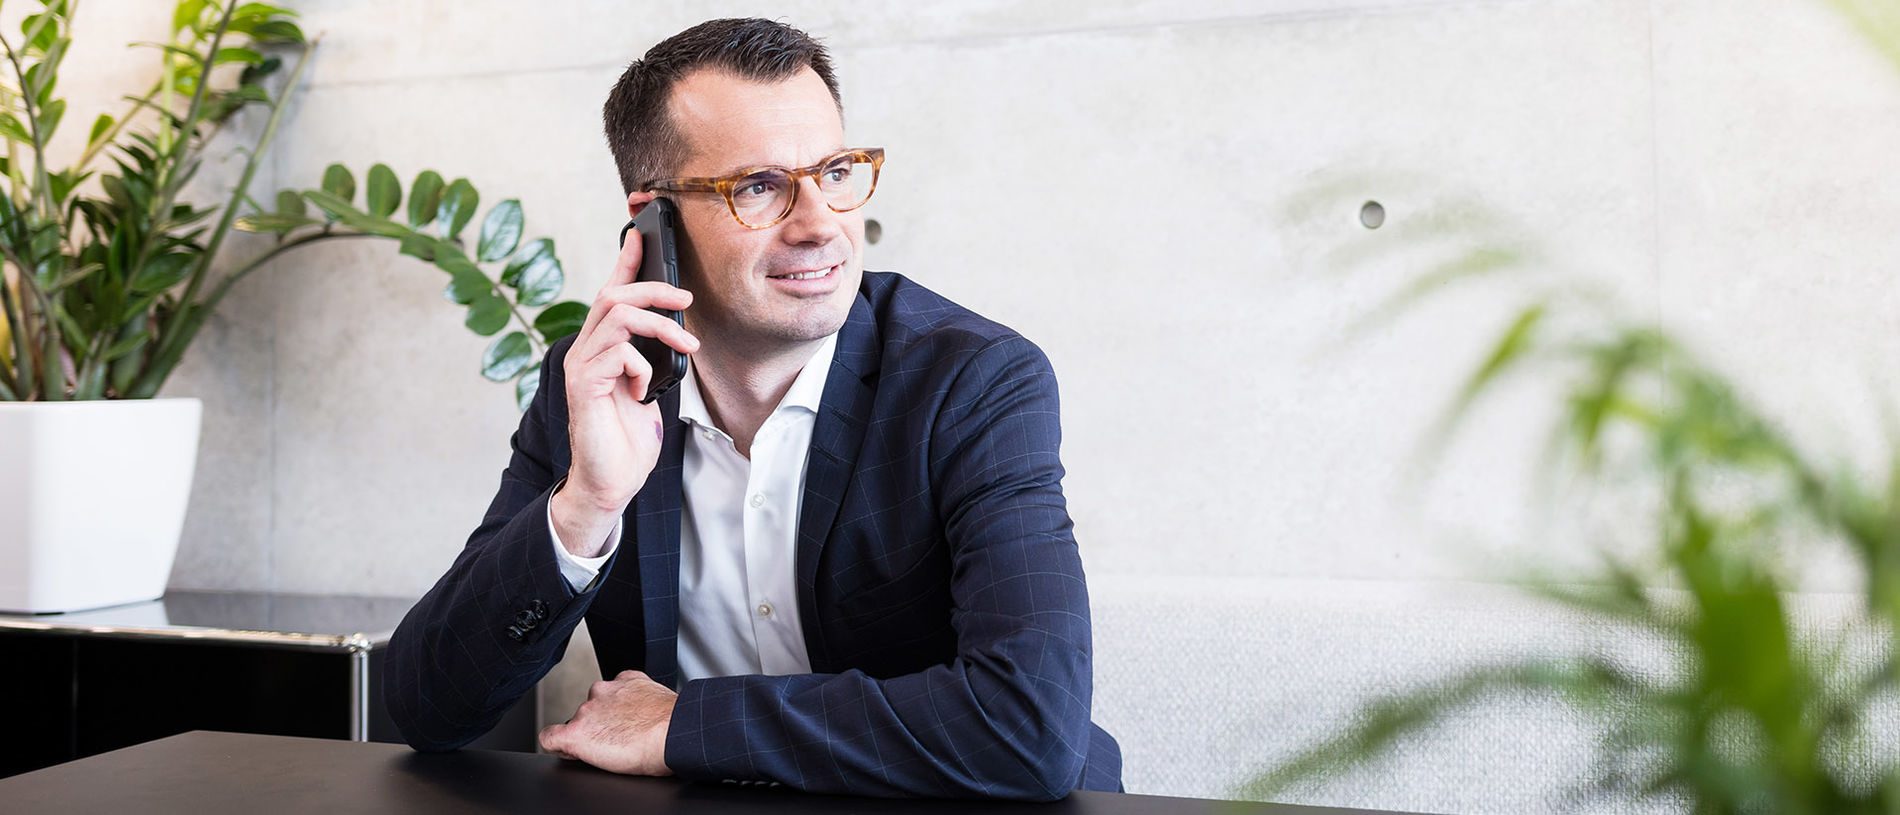 A man with glasses is sitting at a table in front of a houseplant and is talking on the mobile phone